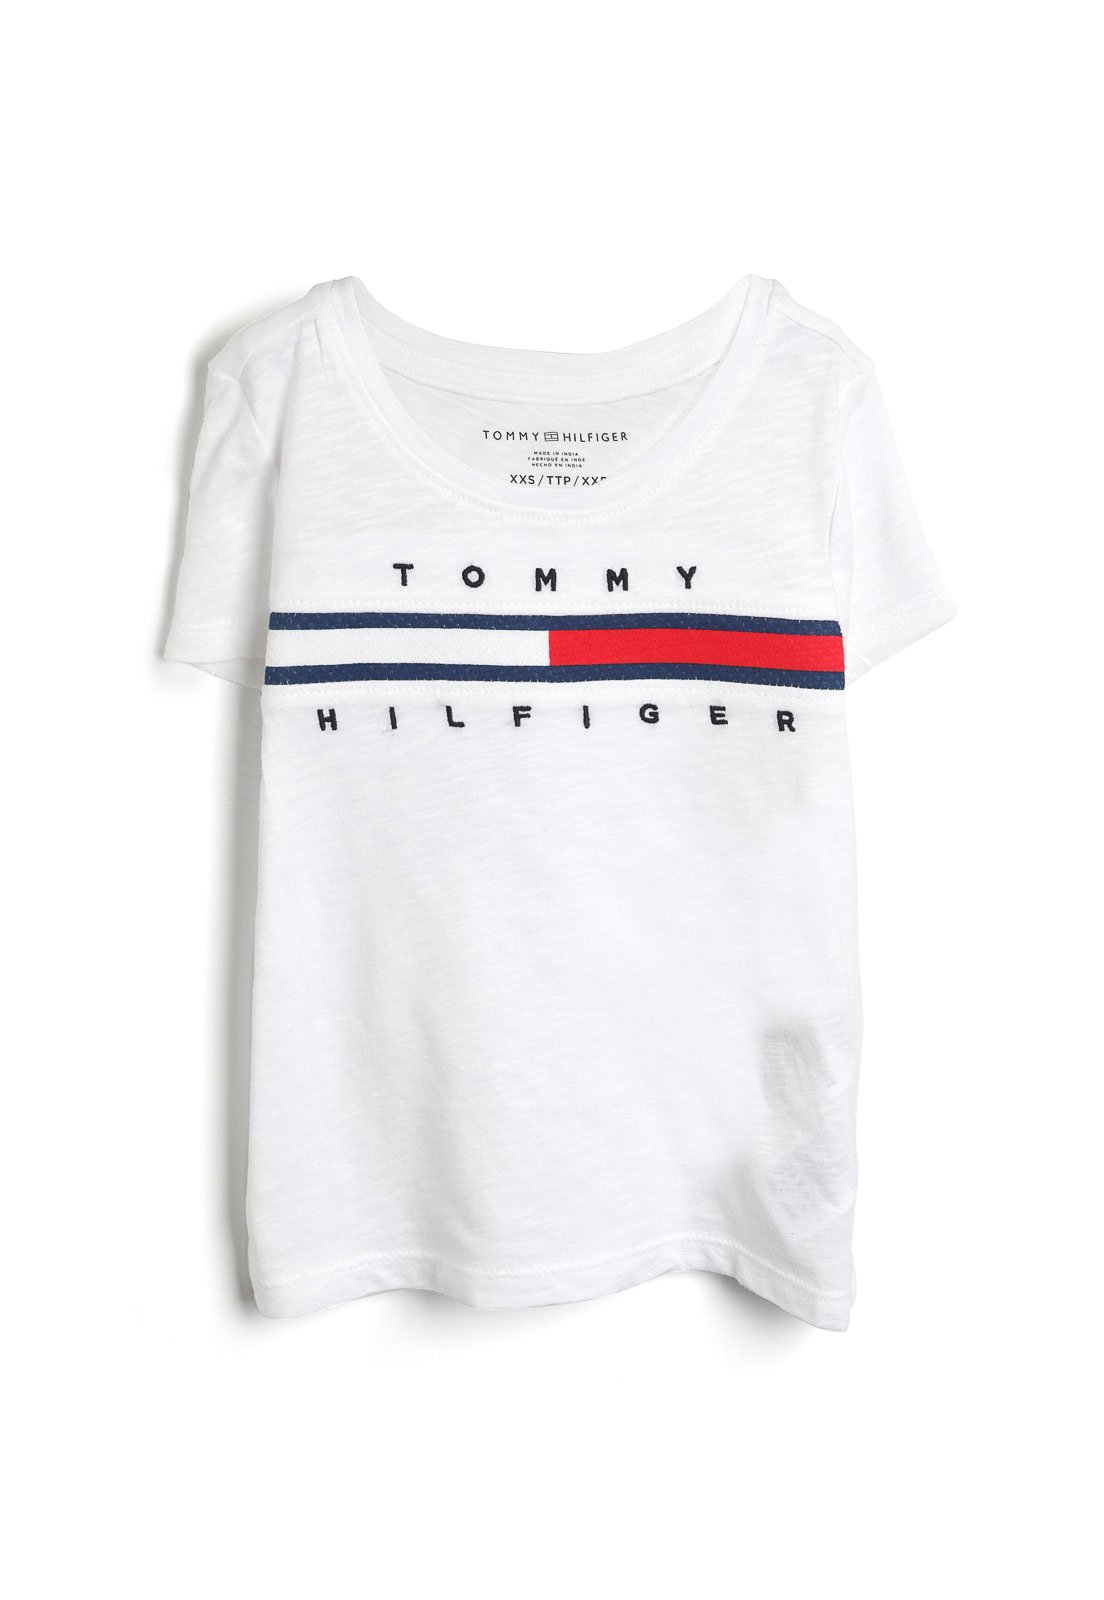 blusas masculinas tommy